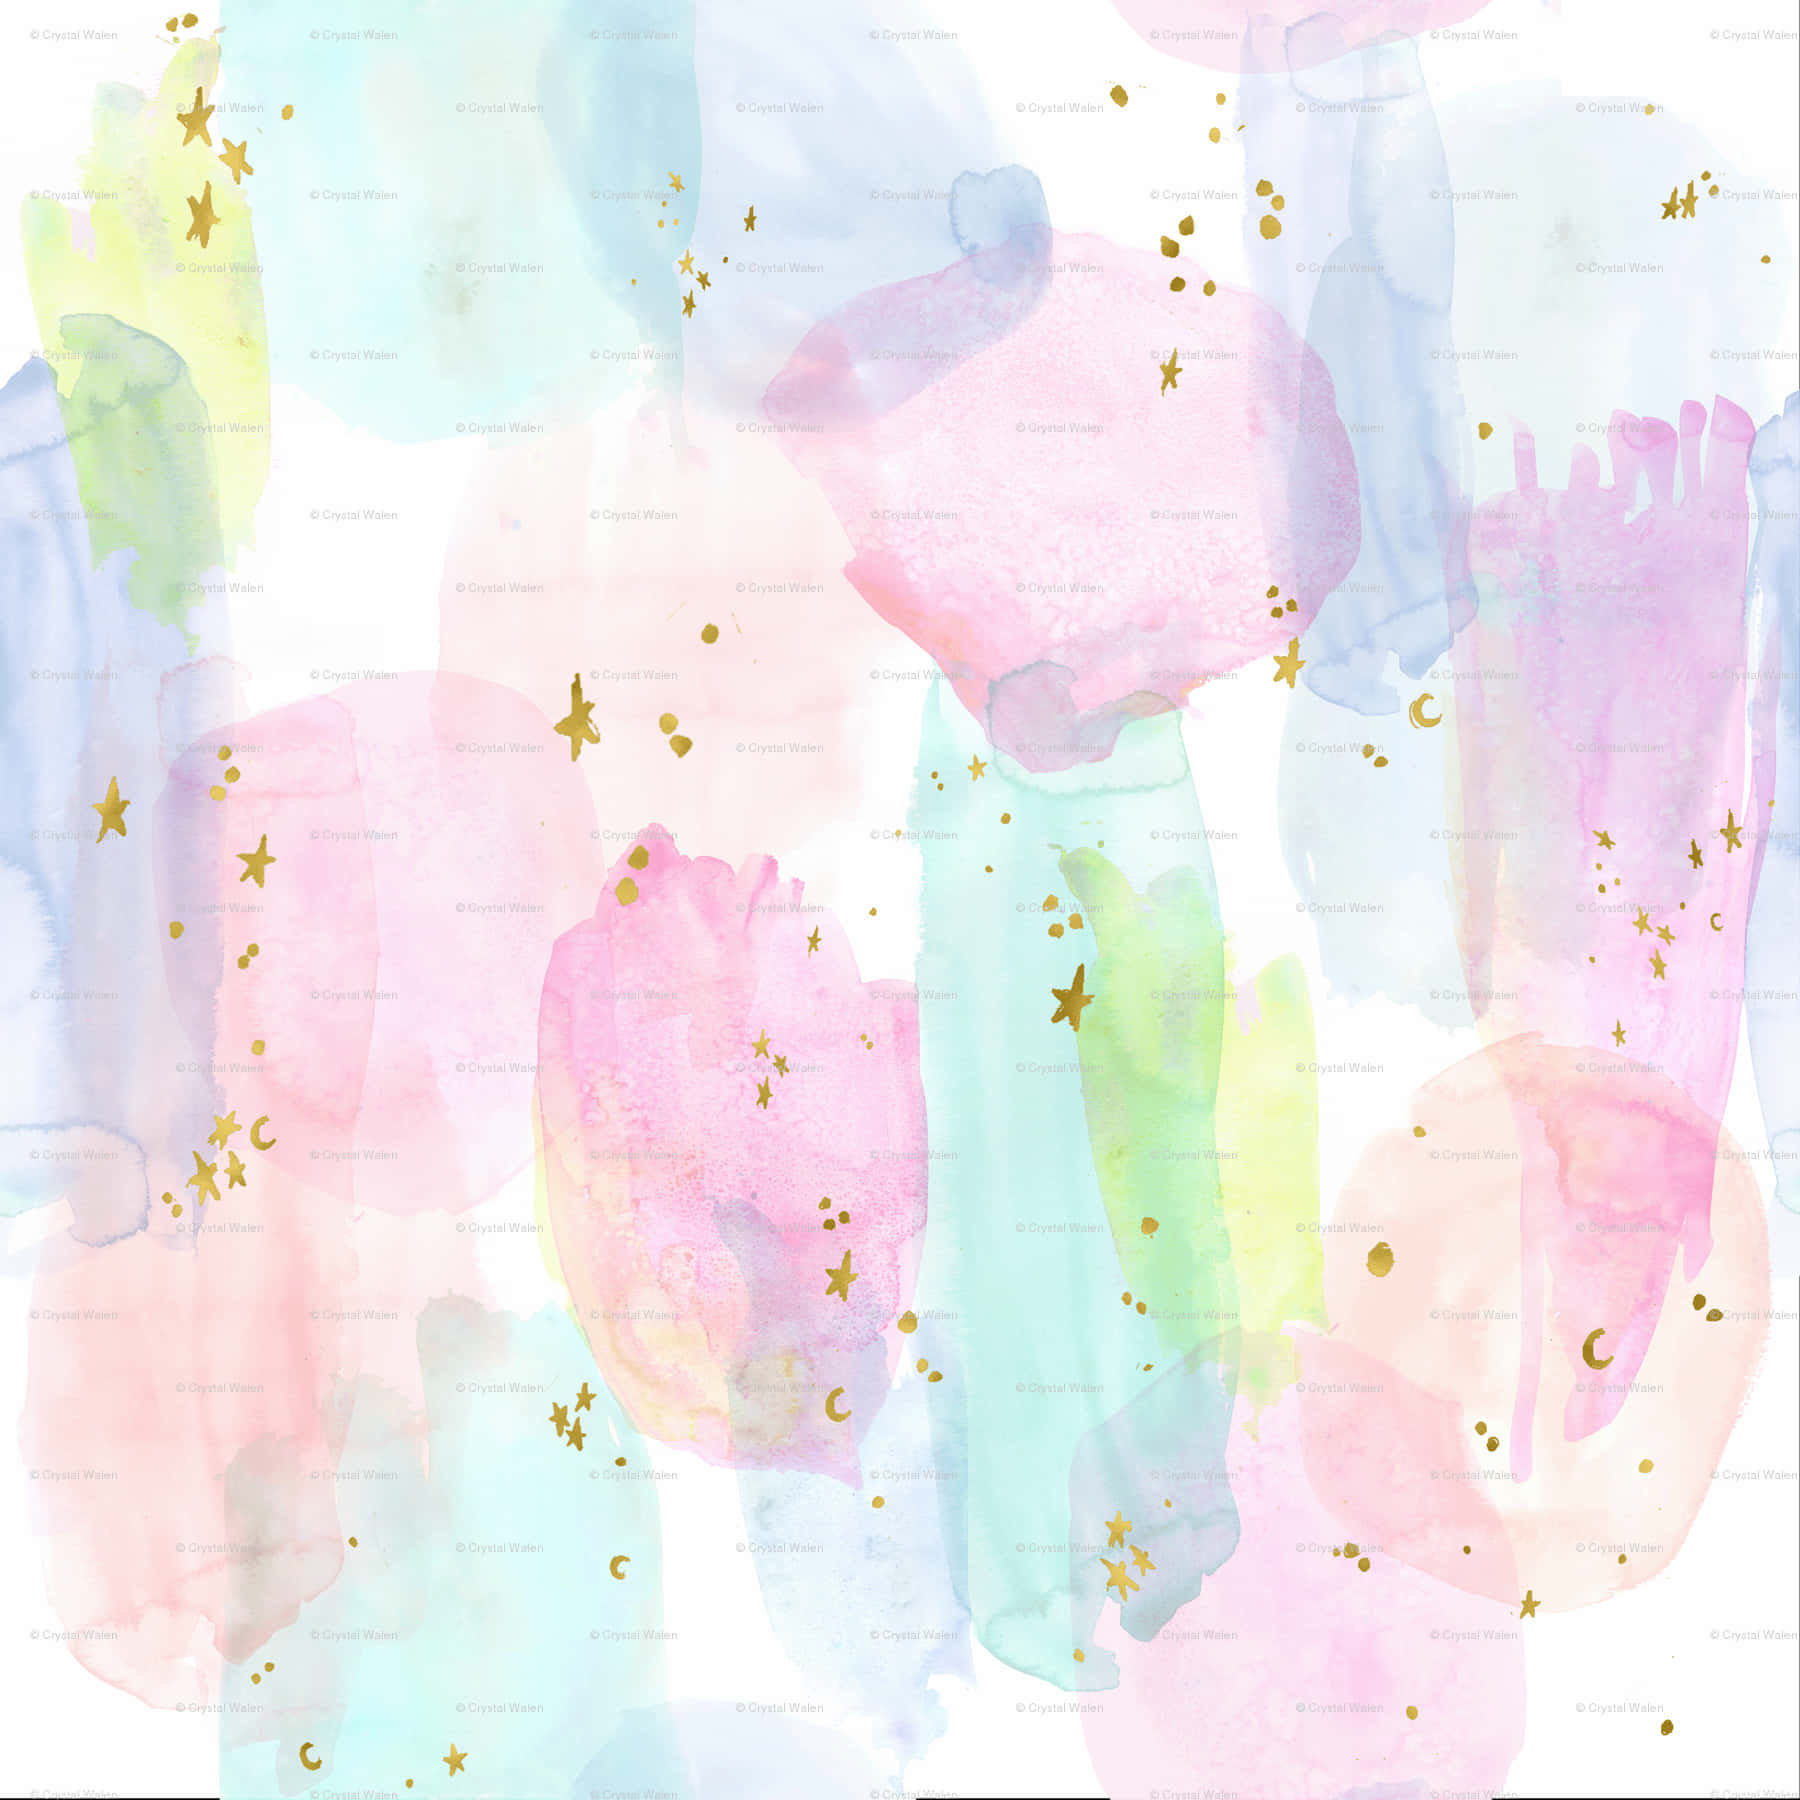 "A blown-up range of pastel colors bring life to a background"